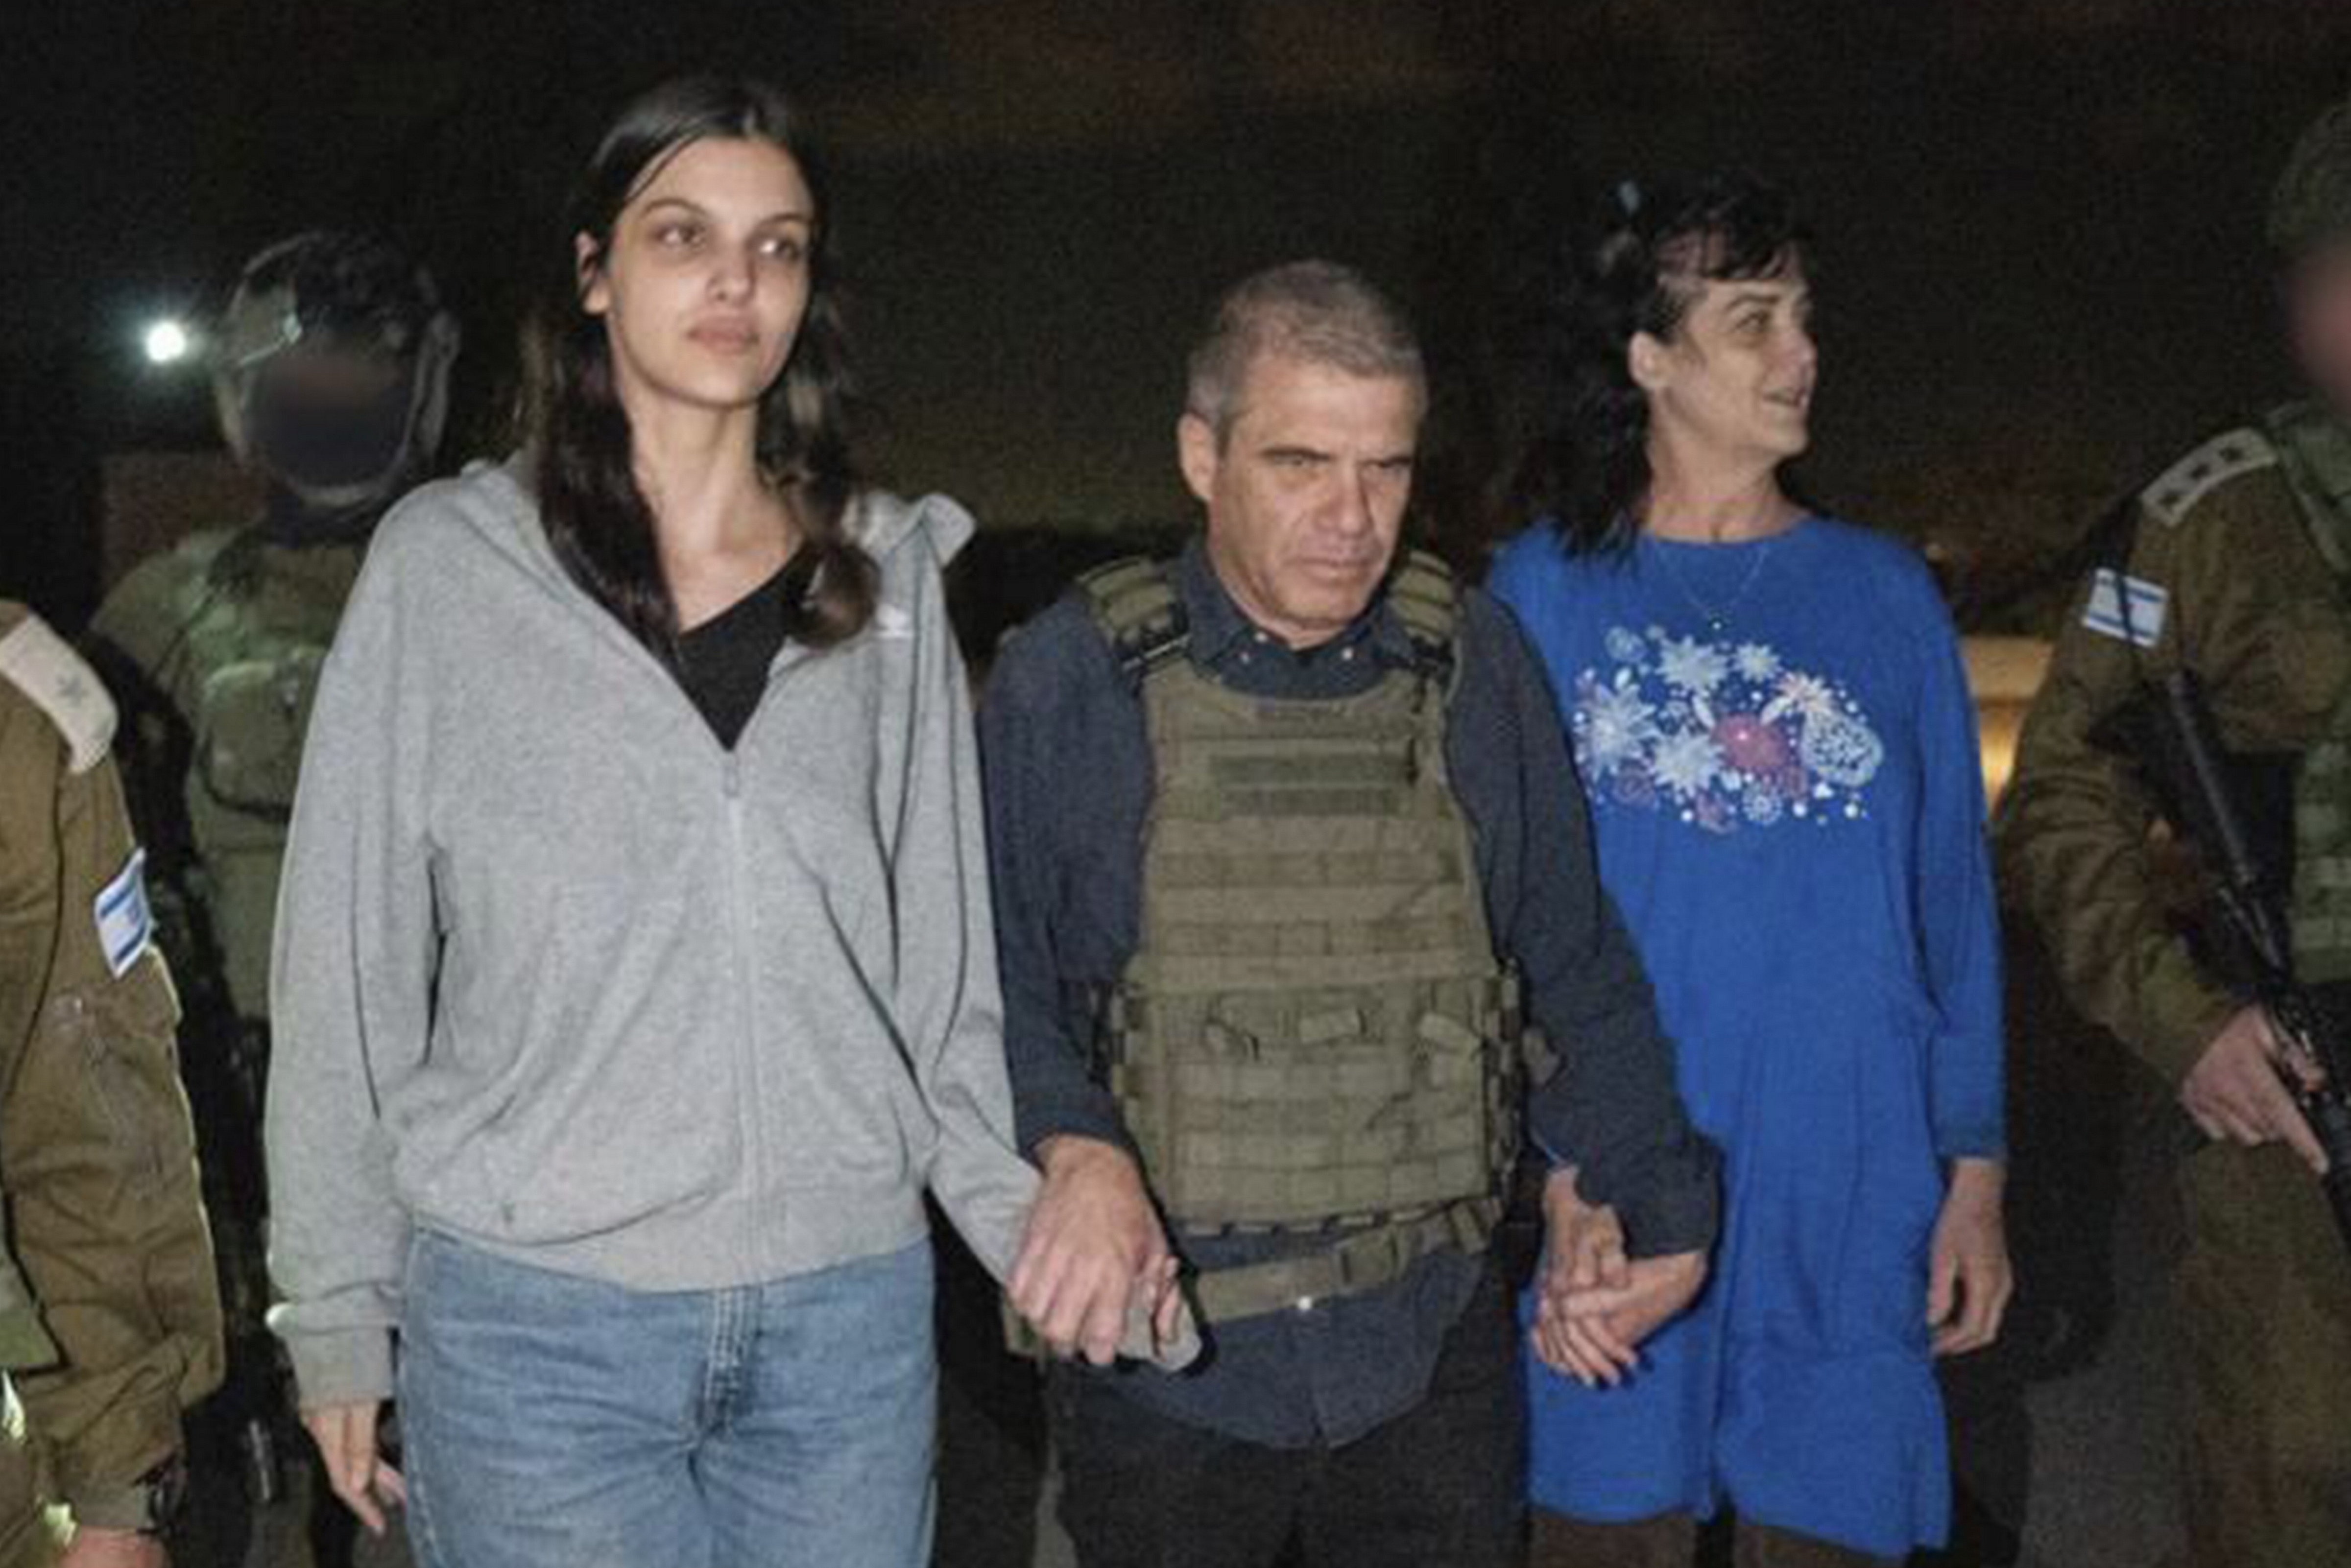 Judith Raanan, right, and her 17-year-old daughter Natalie are escorted by Israeli soldiers and Gal Hirsch, Prime Minister Benjamin Netanyahus special coordinator for returning the hostages, as they return to Israel from captivity in the Gaza Strip, Friday, Oct. 20, 2023. Hamas released the pair in what it said was a goodwill gesture late Friday, nearly two weeks after they were captured in a bloody cross-border raid by the Islamic militant group. AP/PTI